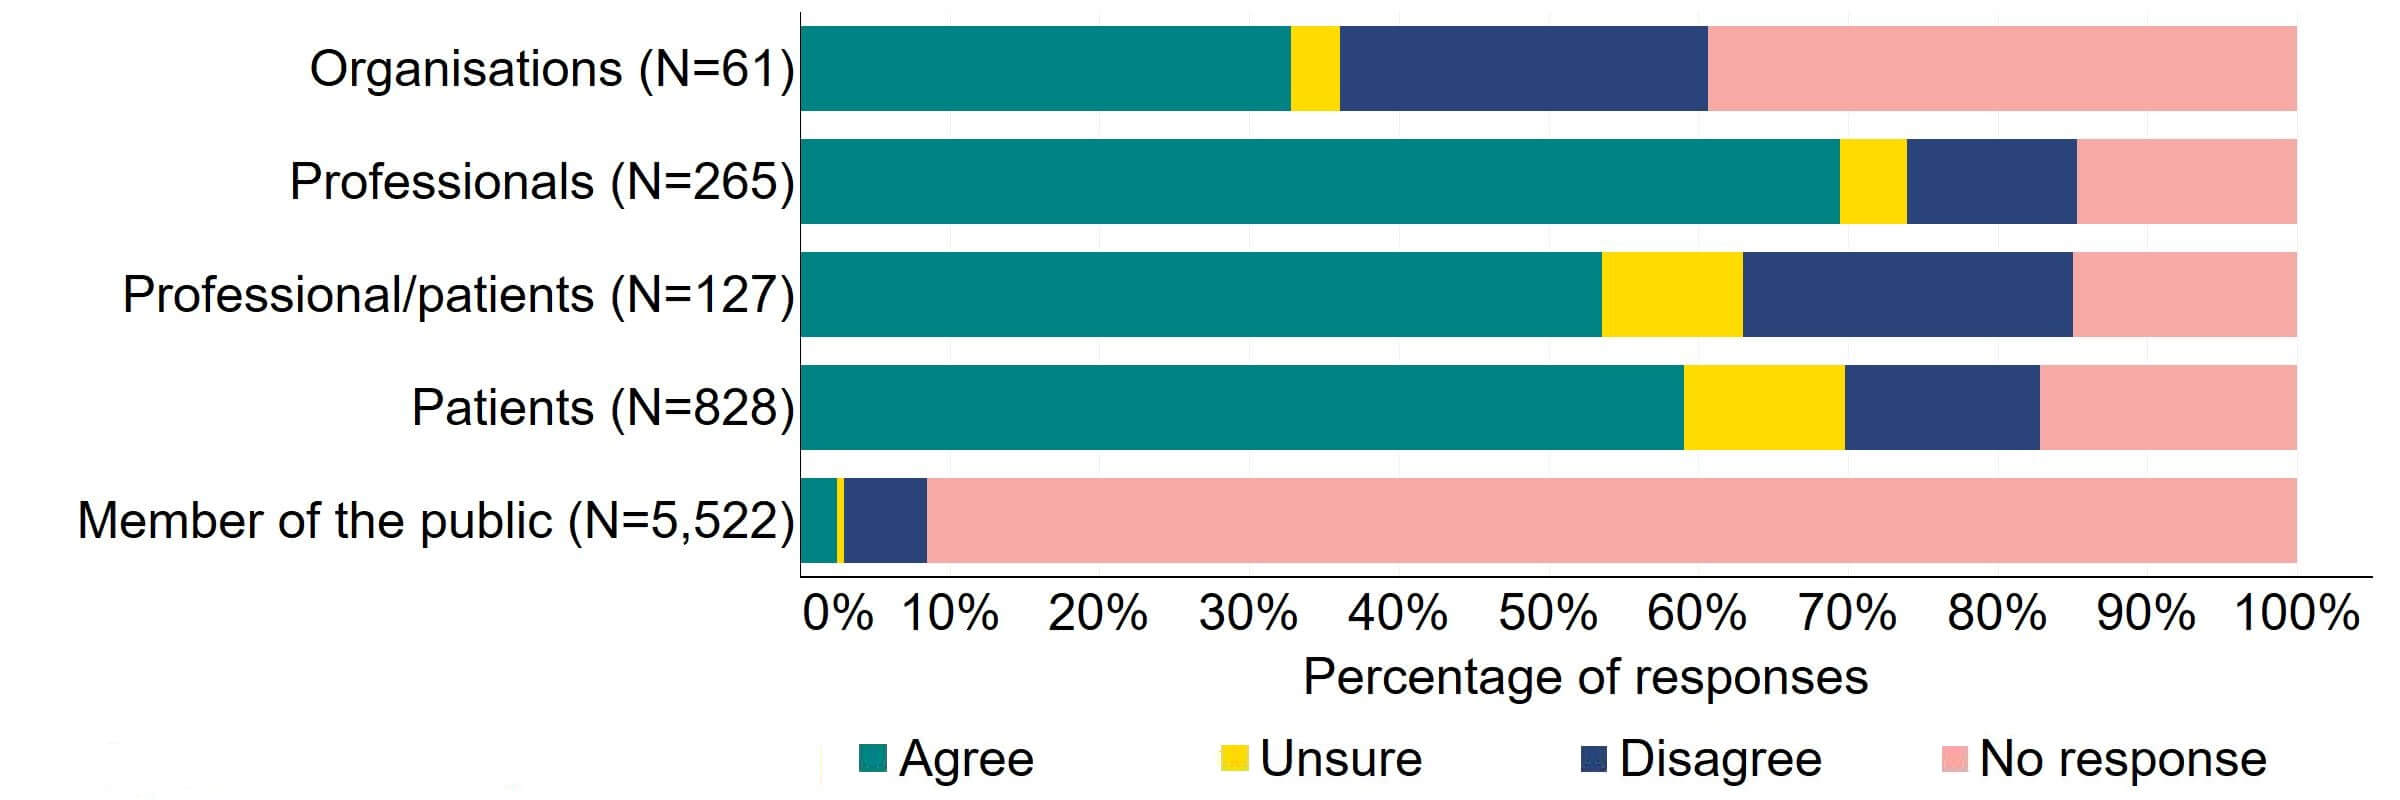 Figure 1 is a stacked bar chart showing the proportion of respondents in each response group who agreed, disagreed, were unsure, or who did not provide a response to the proposal. The underlying data can be downloaded as an Excel worksheet at the top of the page.